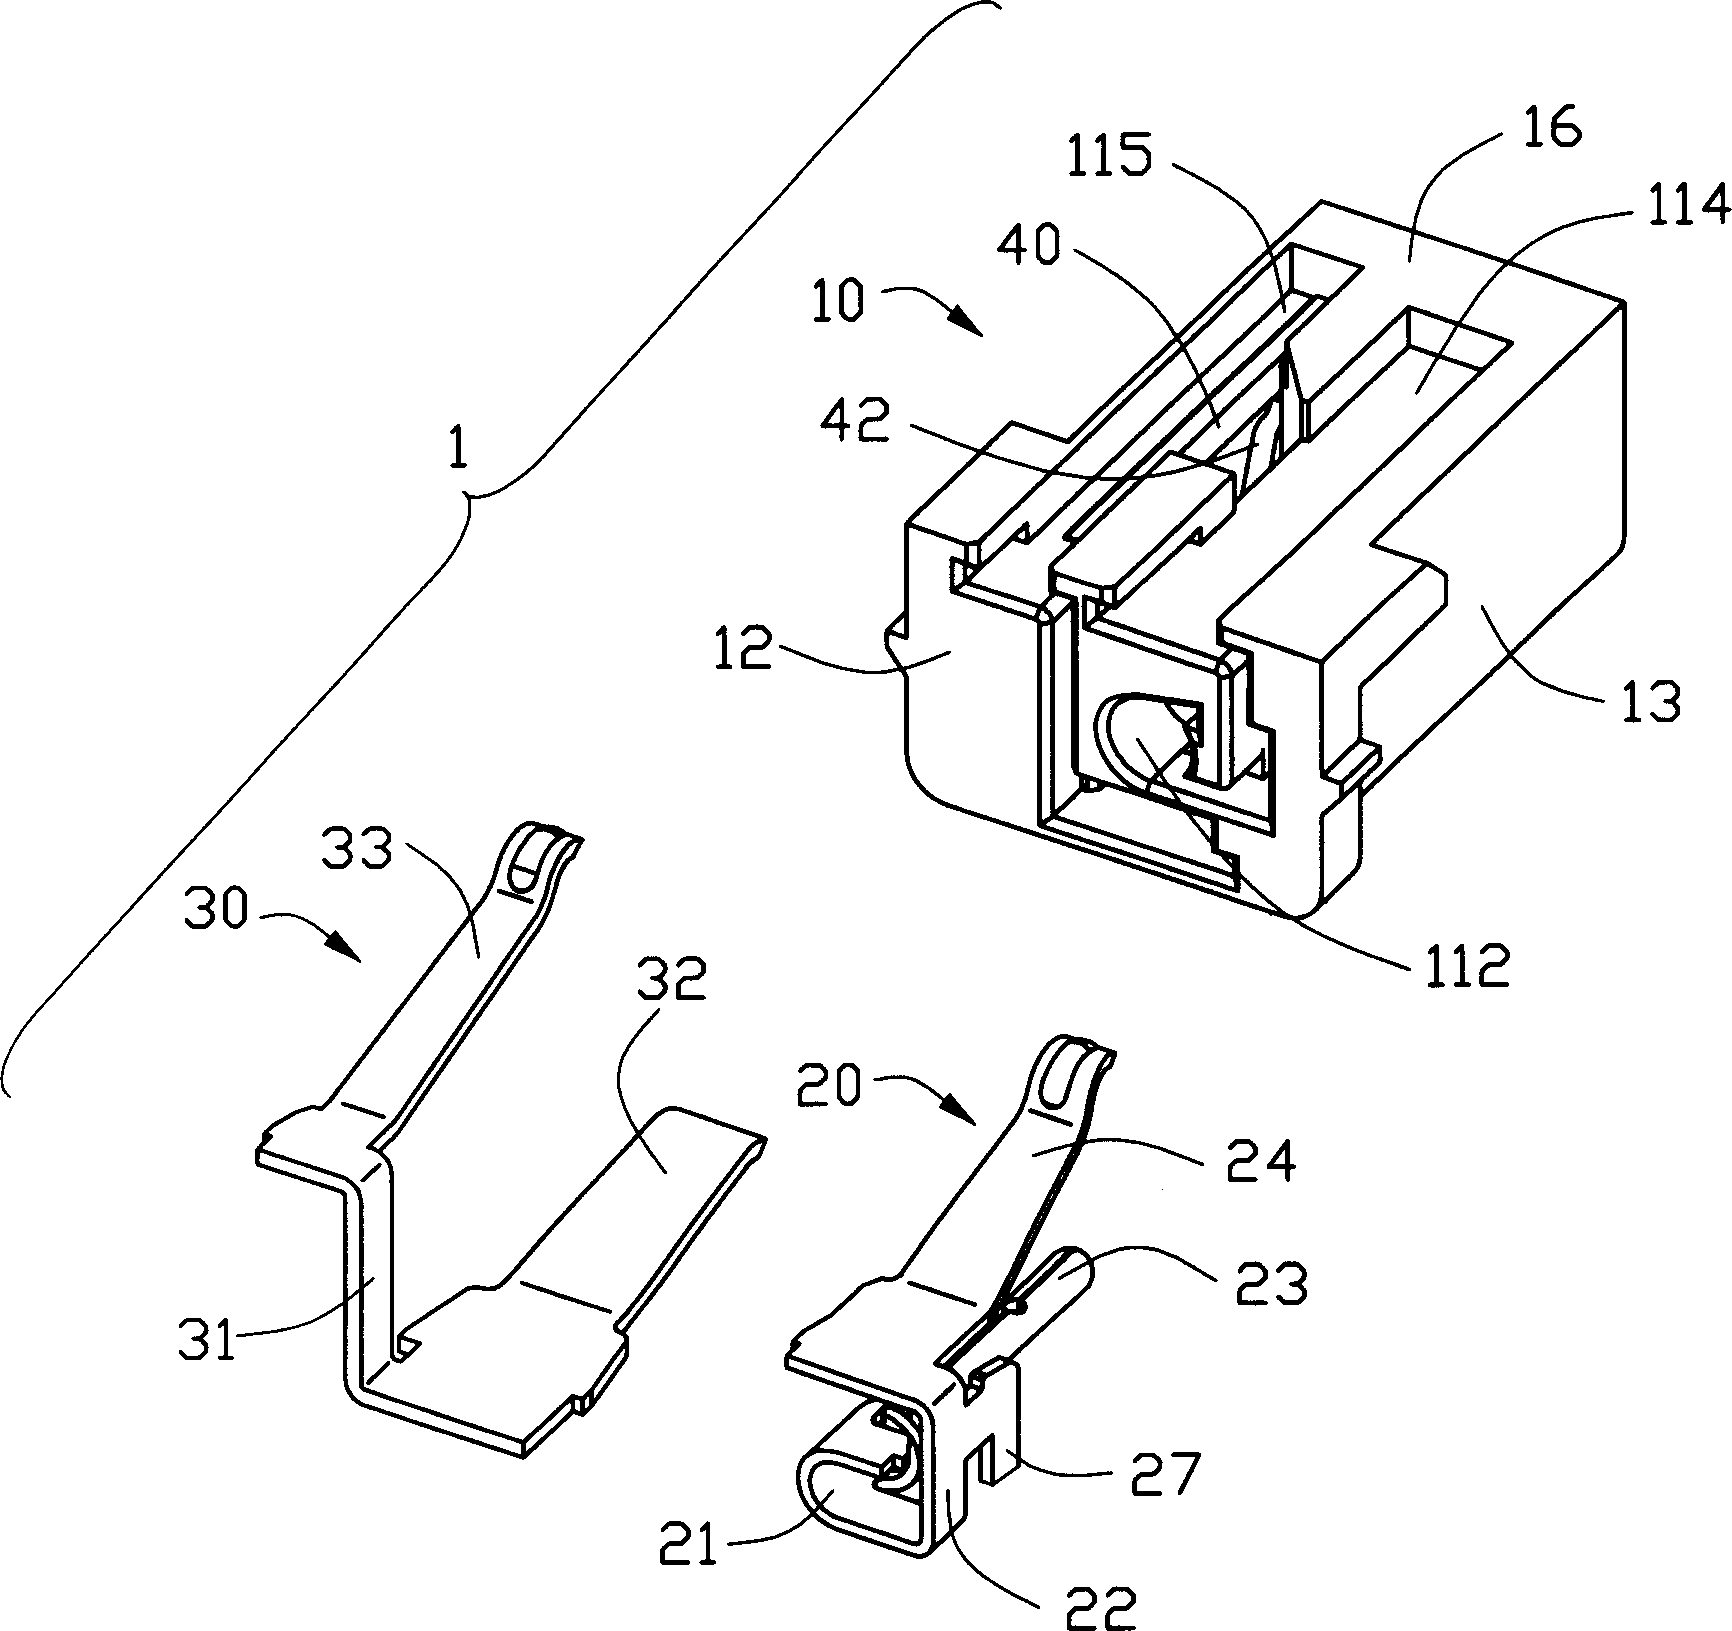 Electric connector manufacturing method